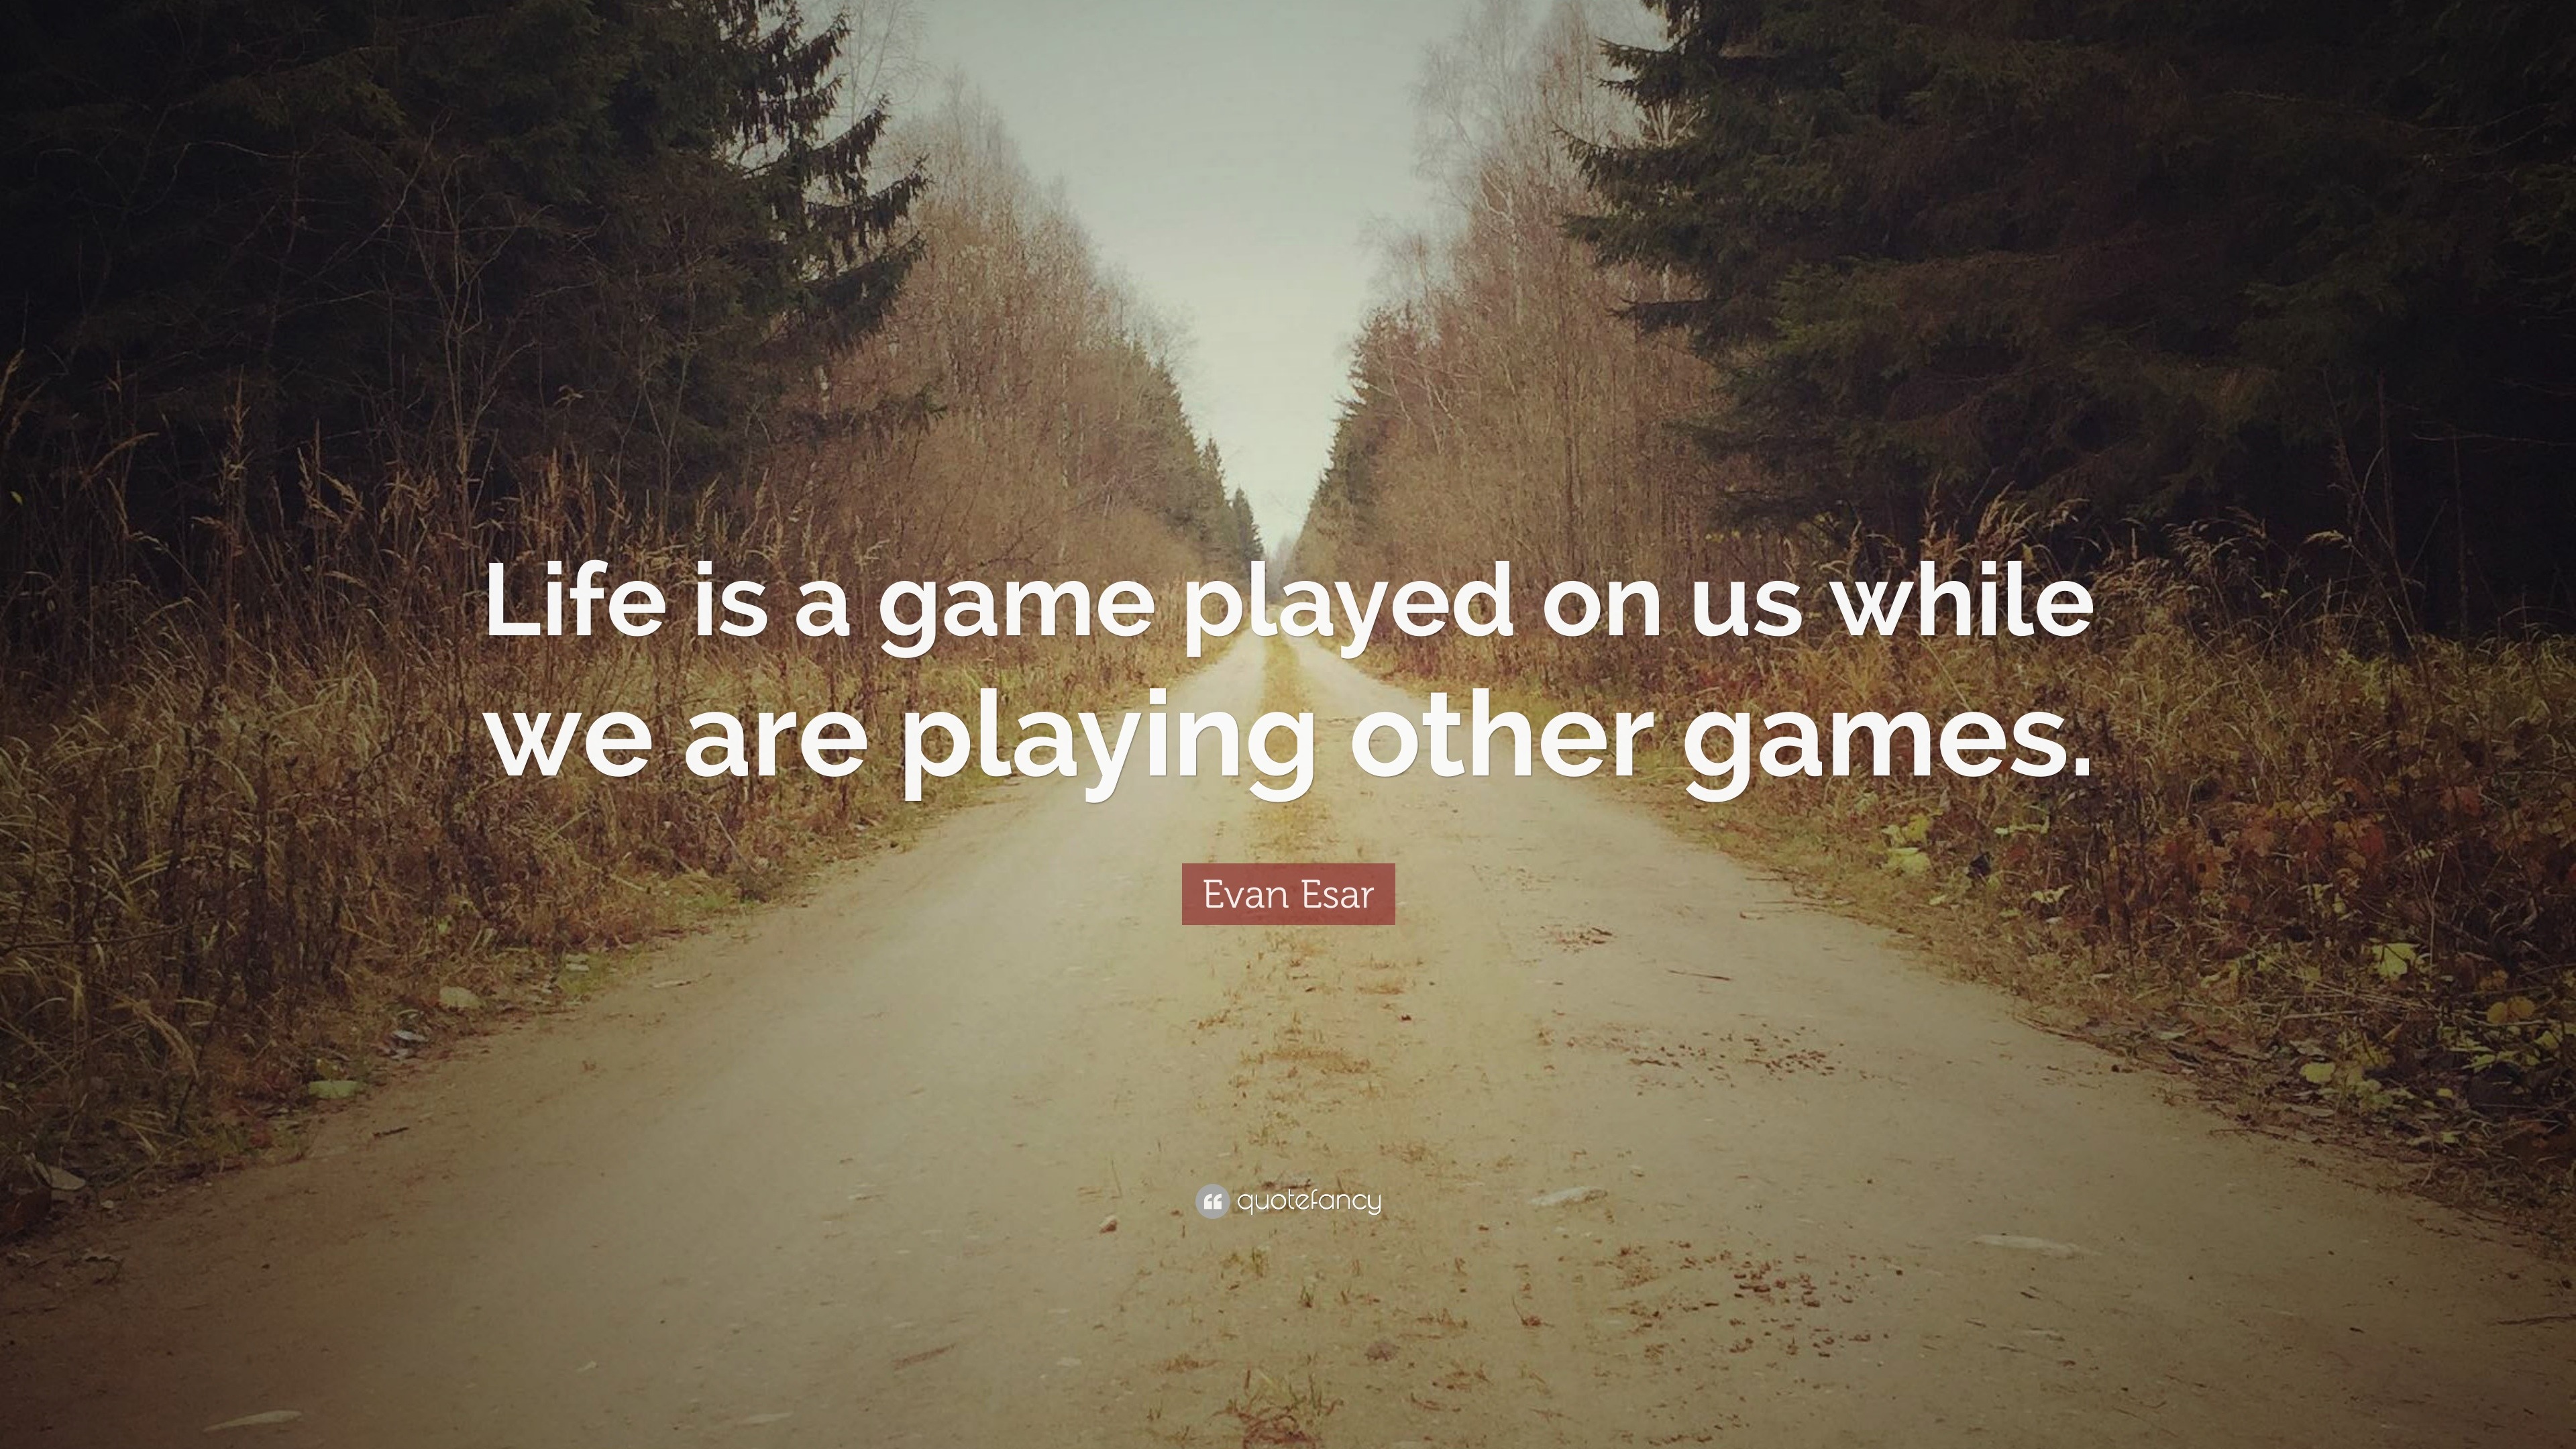 The Game!: Life is a game, learn how to play along! See more